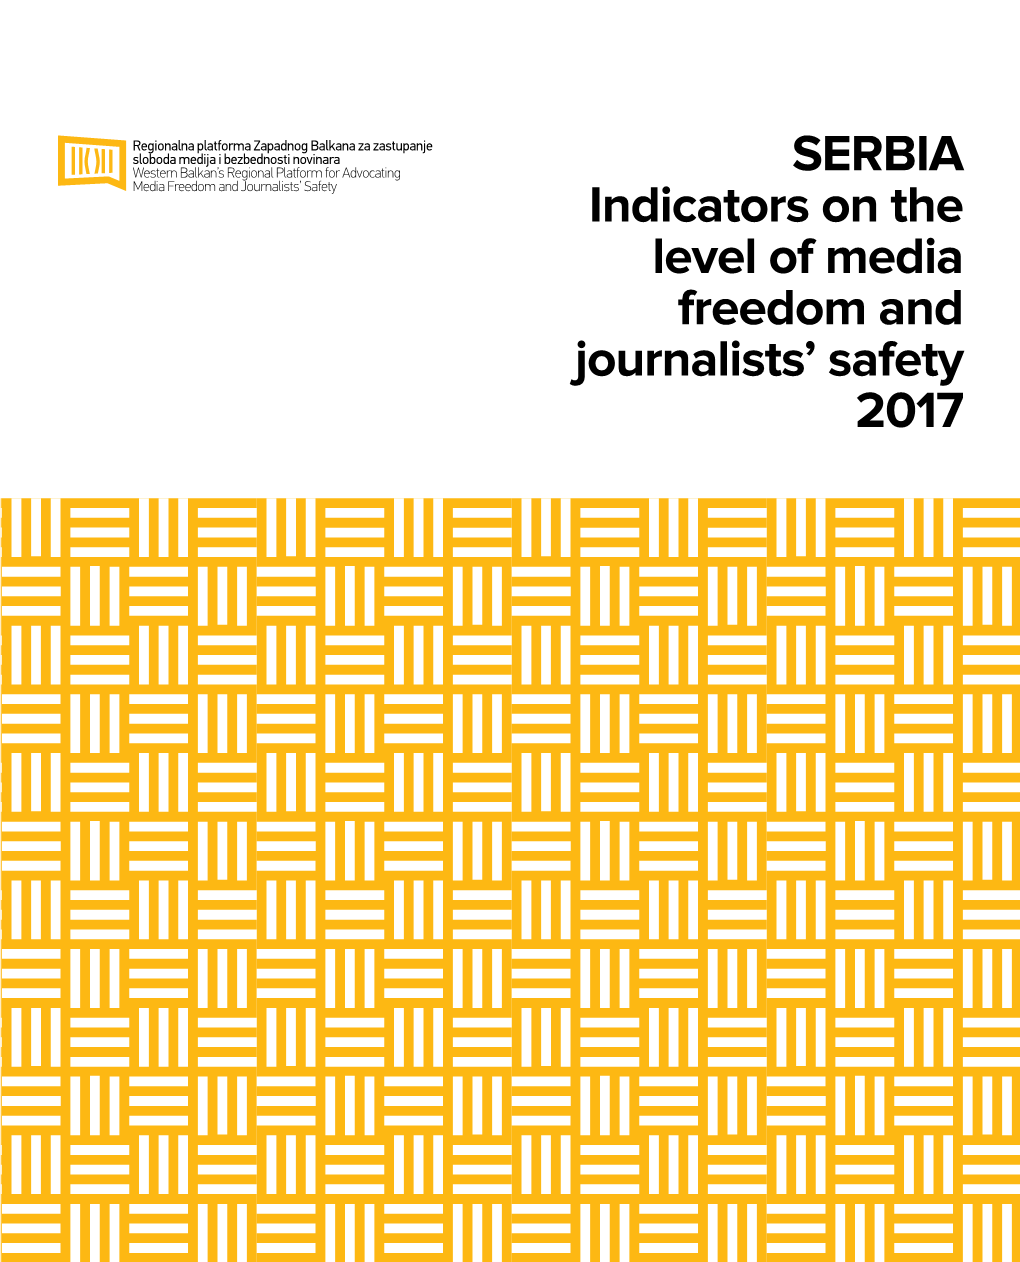 Indicators on the Level of Media Freedom and Journalists’ Safety 2017